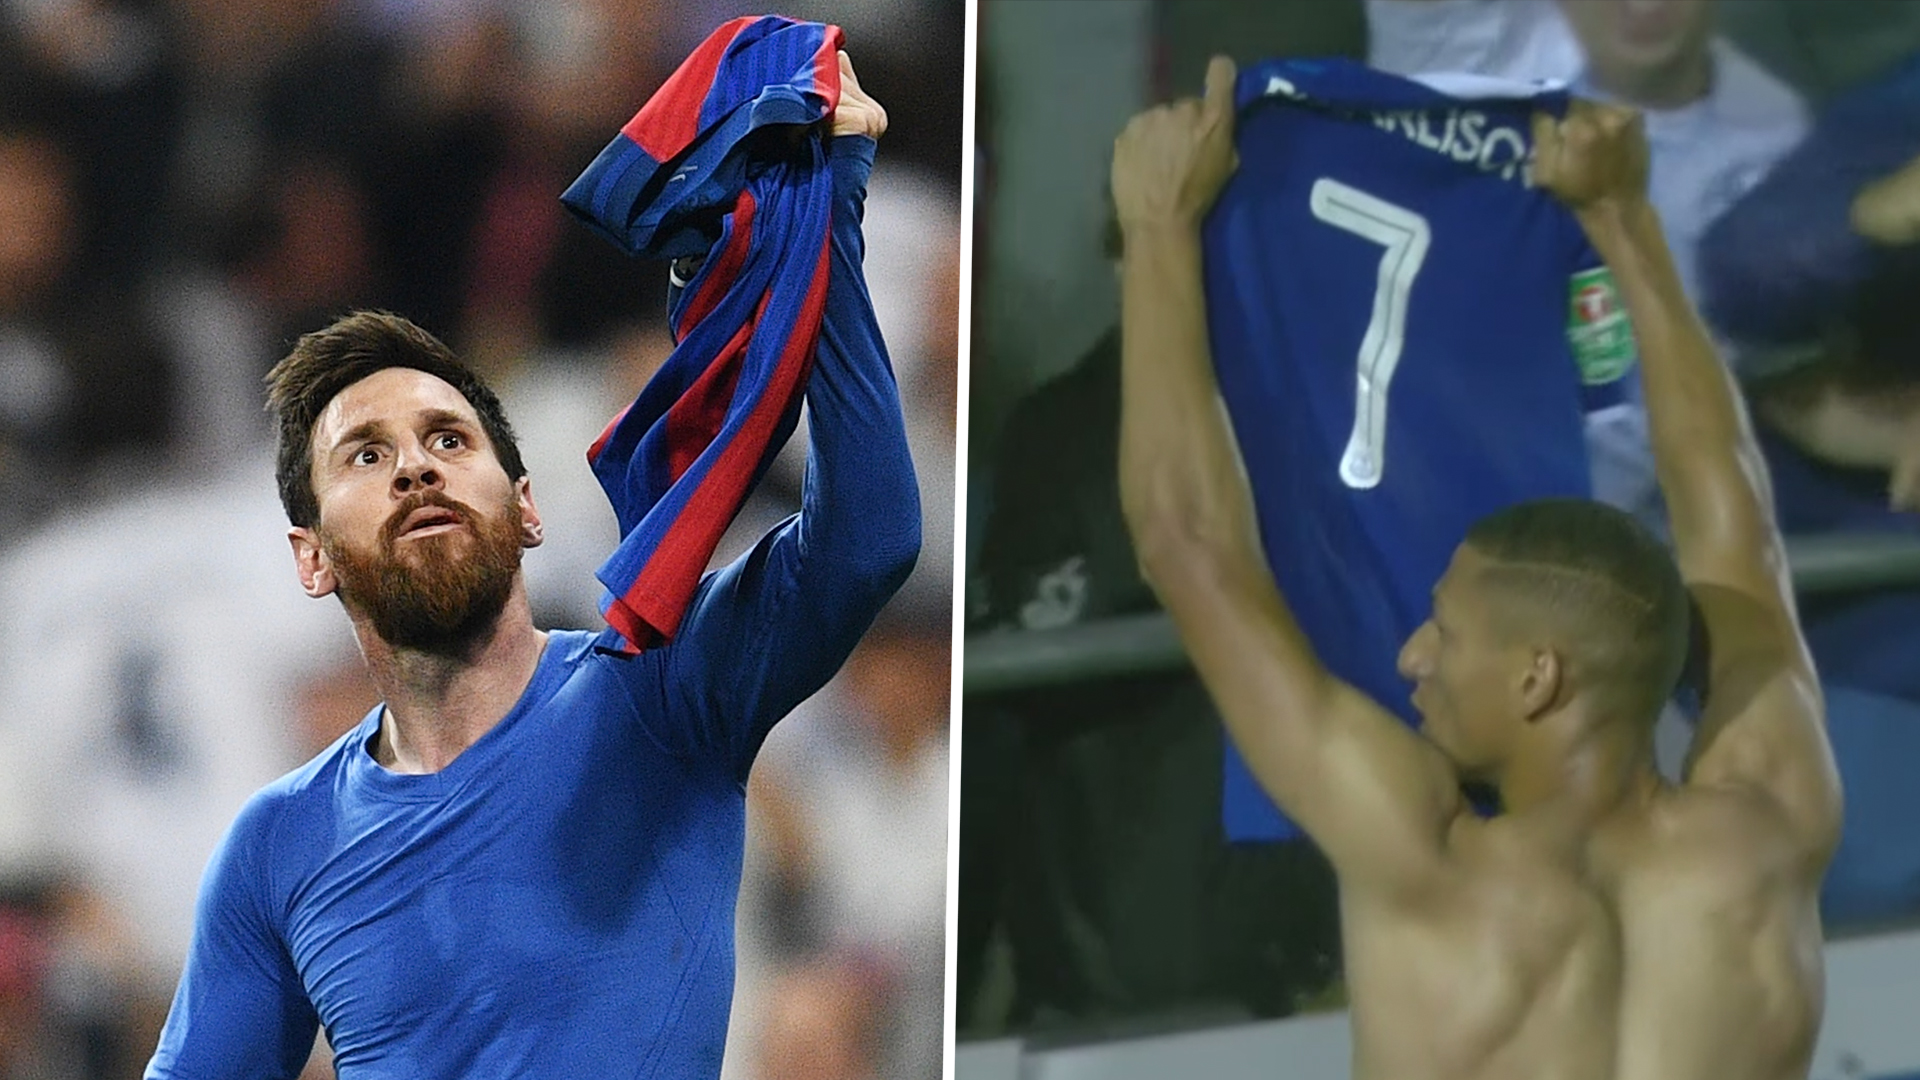 messi holding jersey